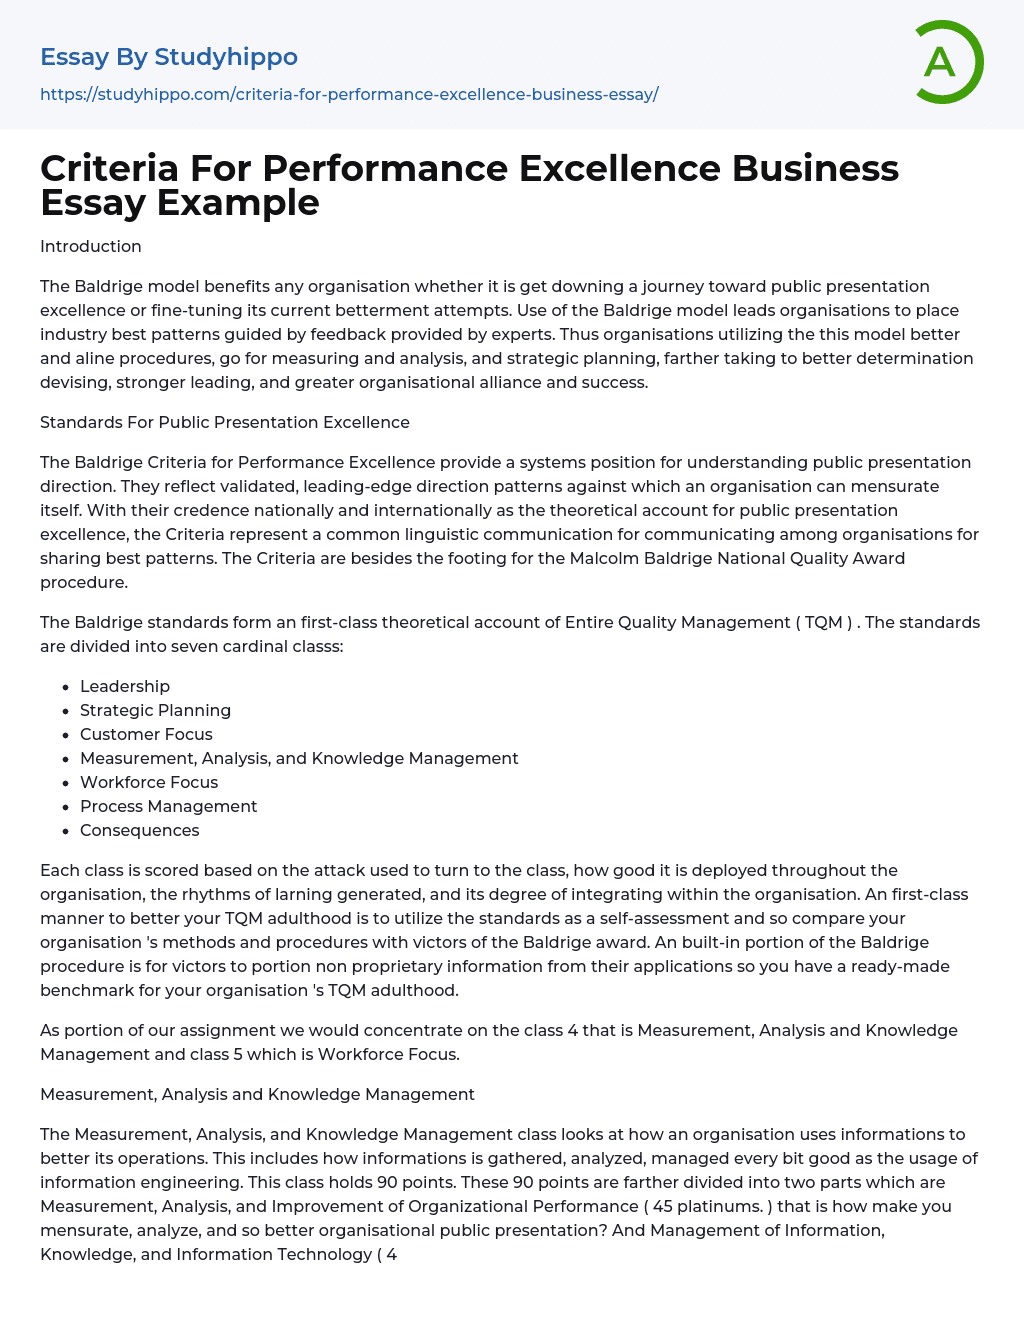 Criteria For Performance Excellence Business Essay Example